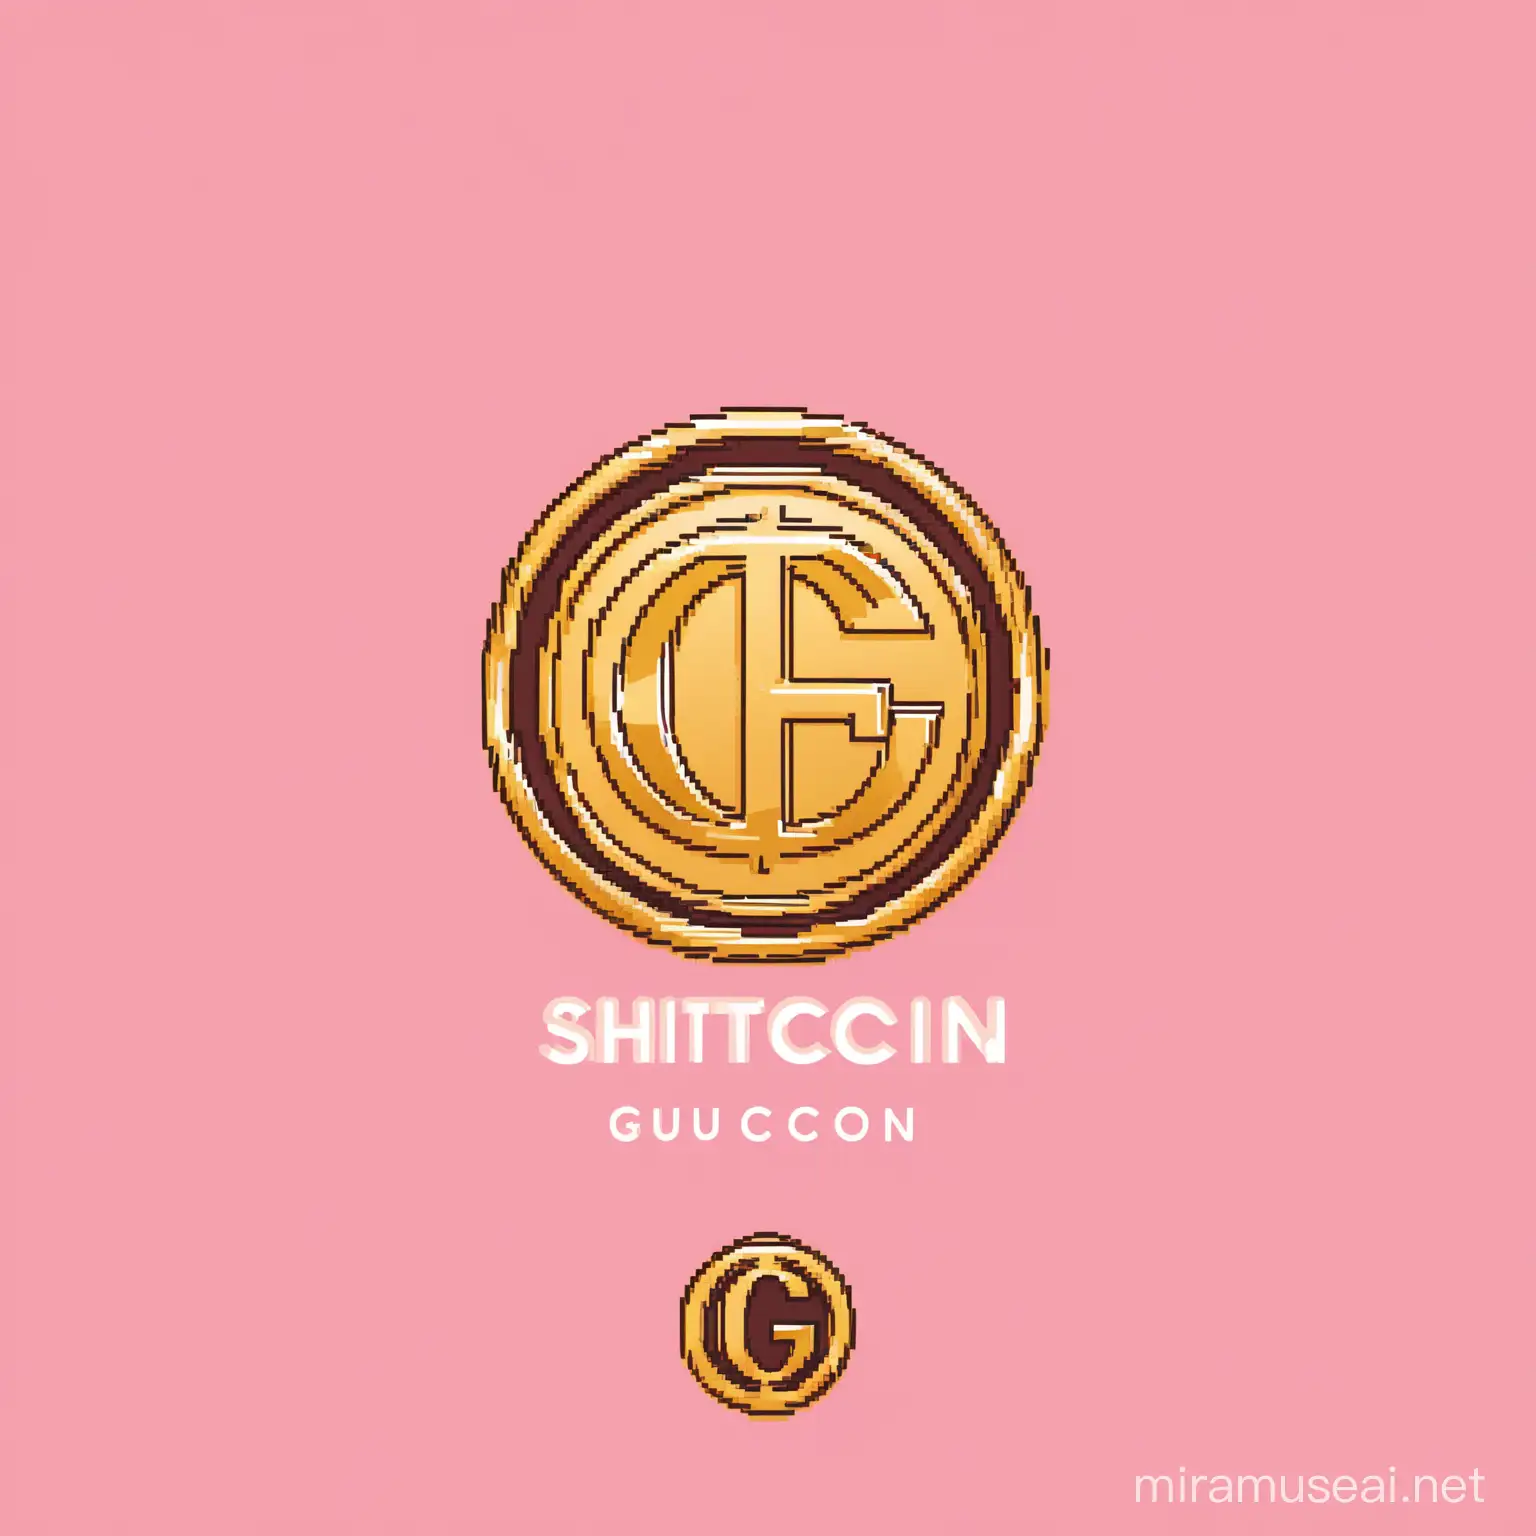 Luxurious GucciThemed Shitcoin Landing Page Design